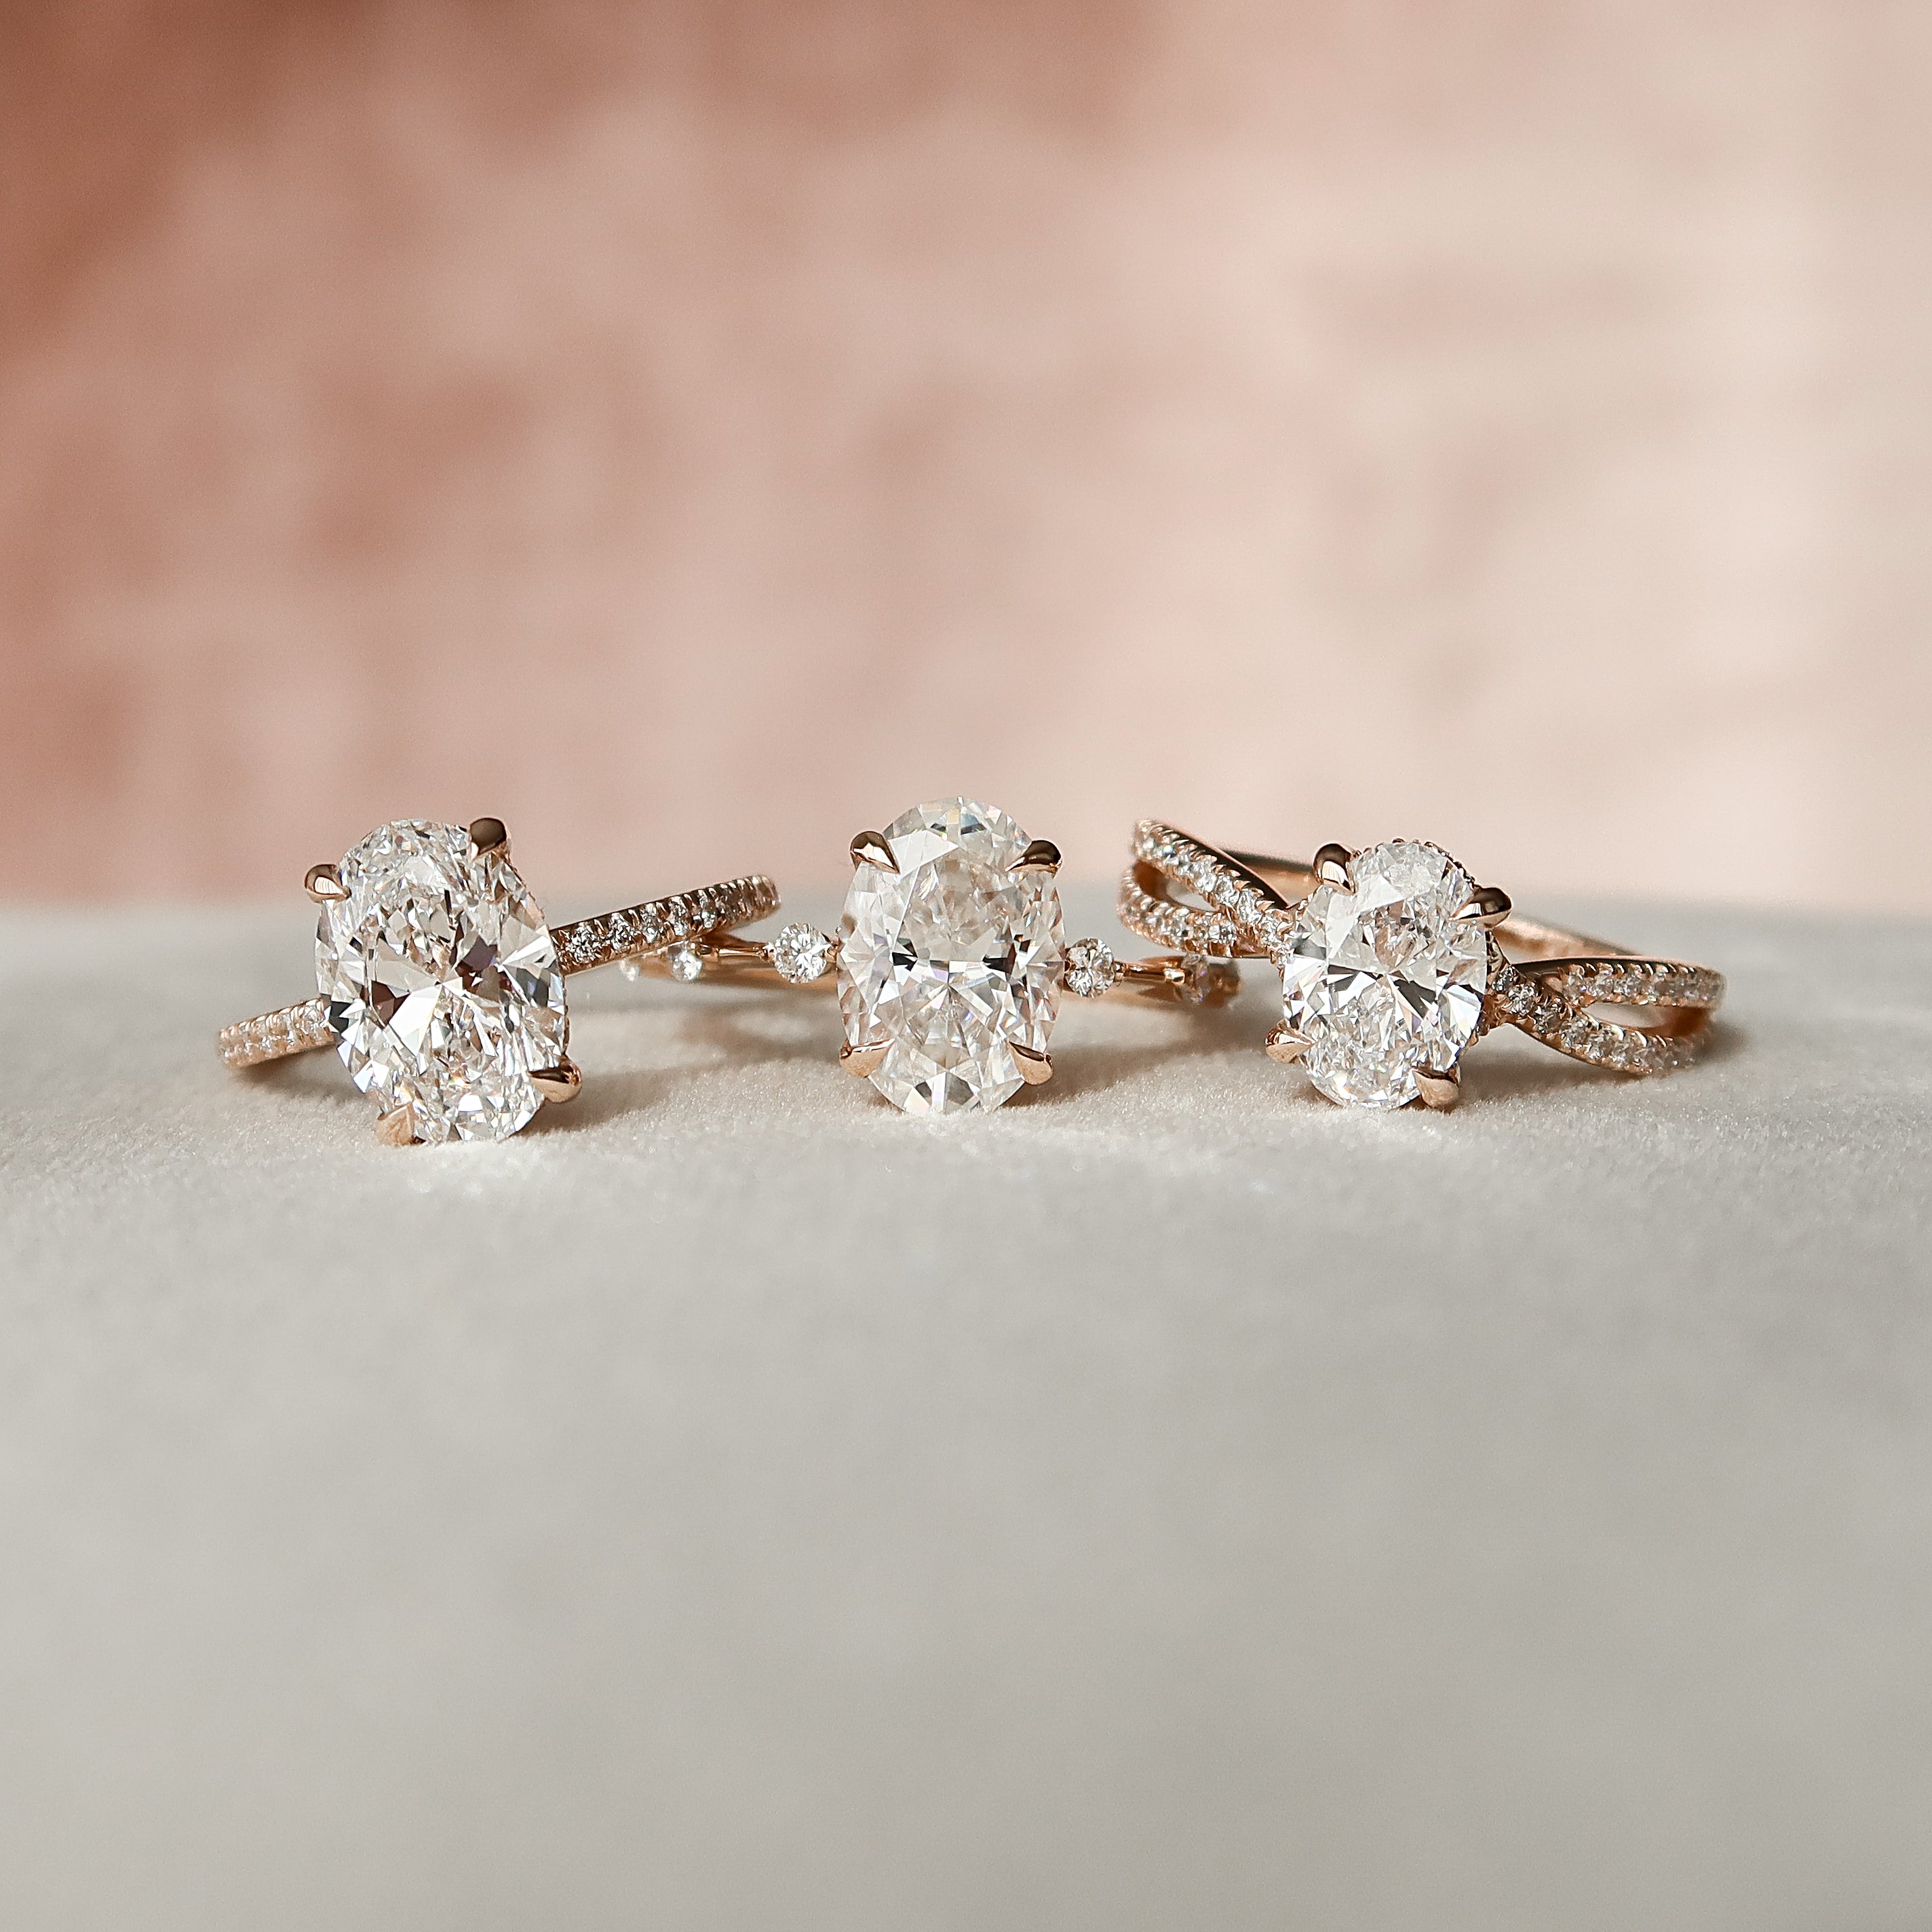 Everything You Need to Know About Rose Gold Engagement Rings